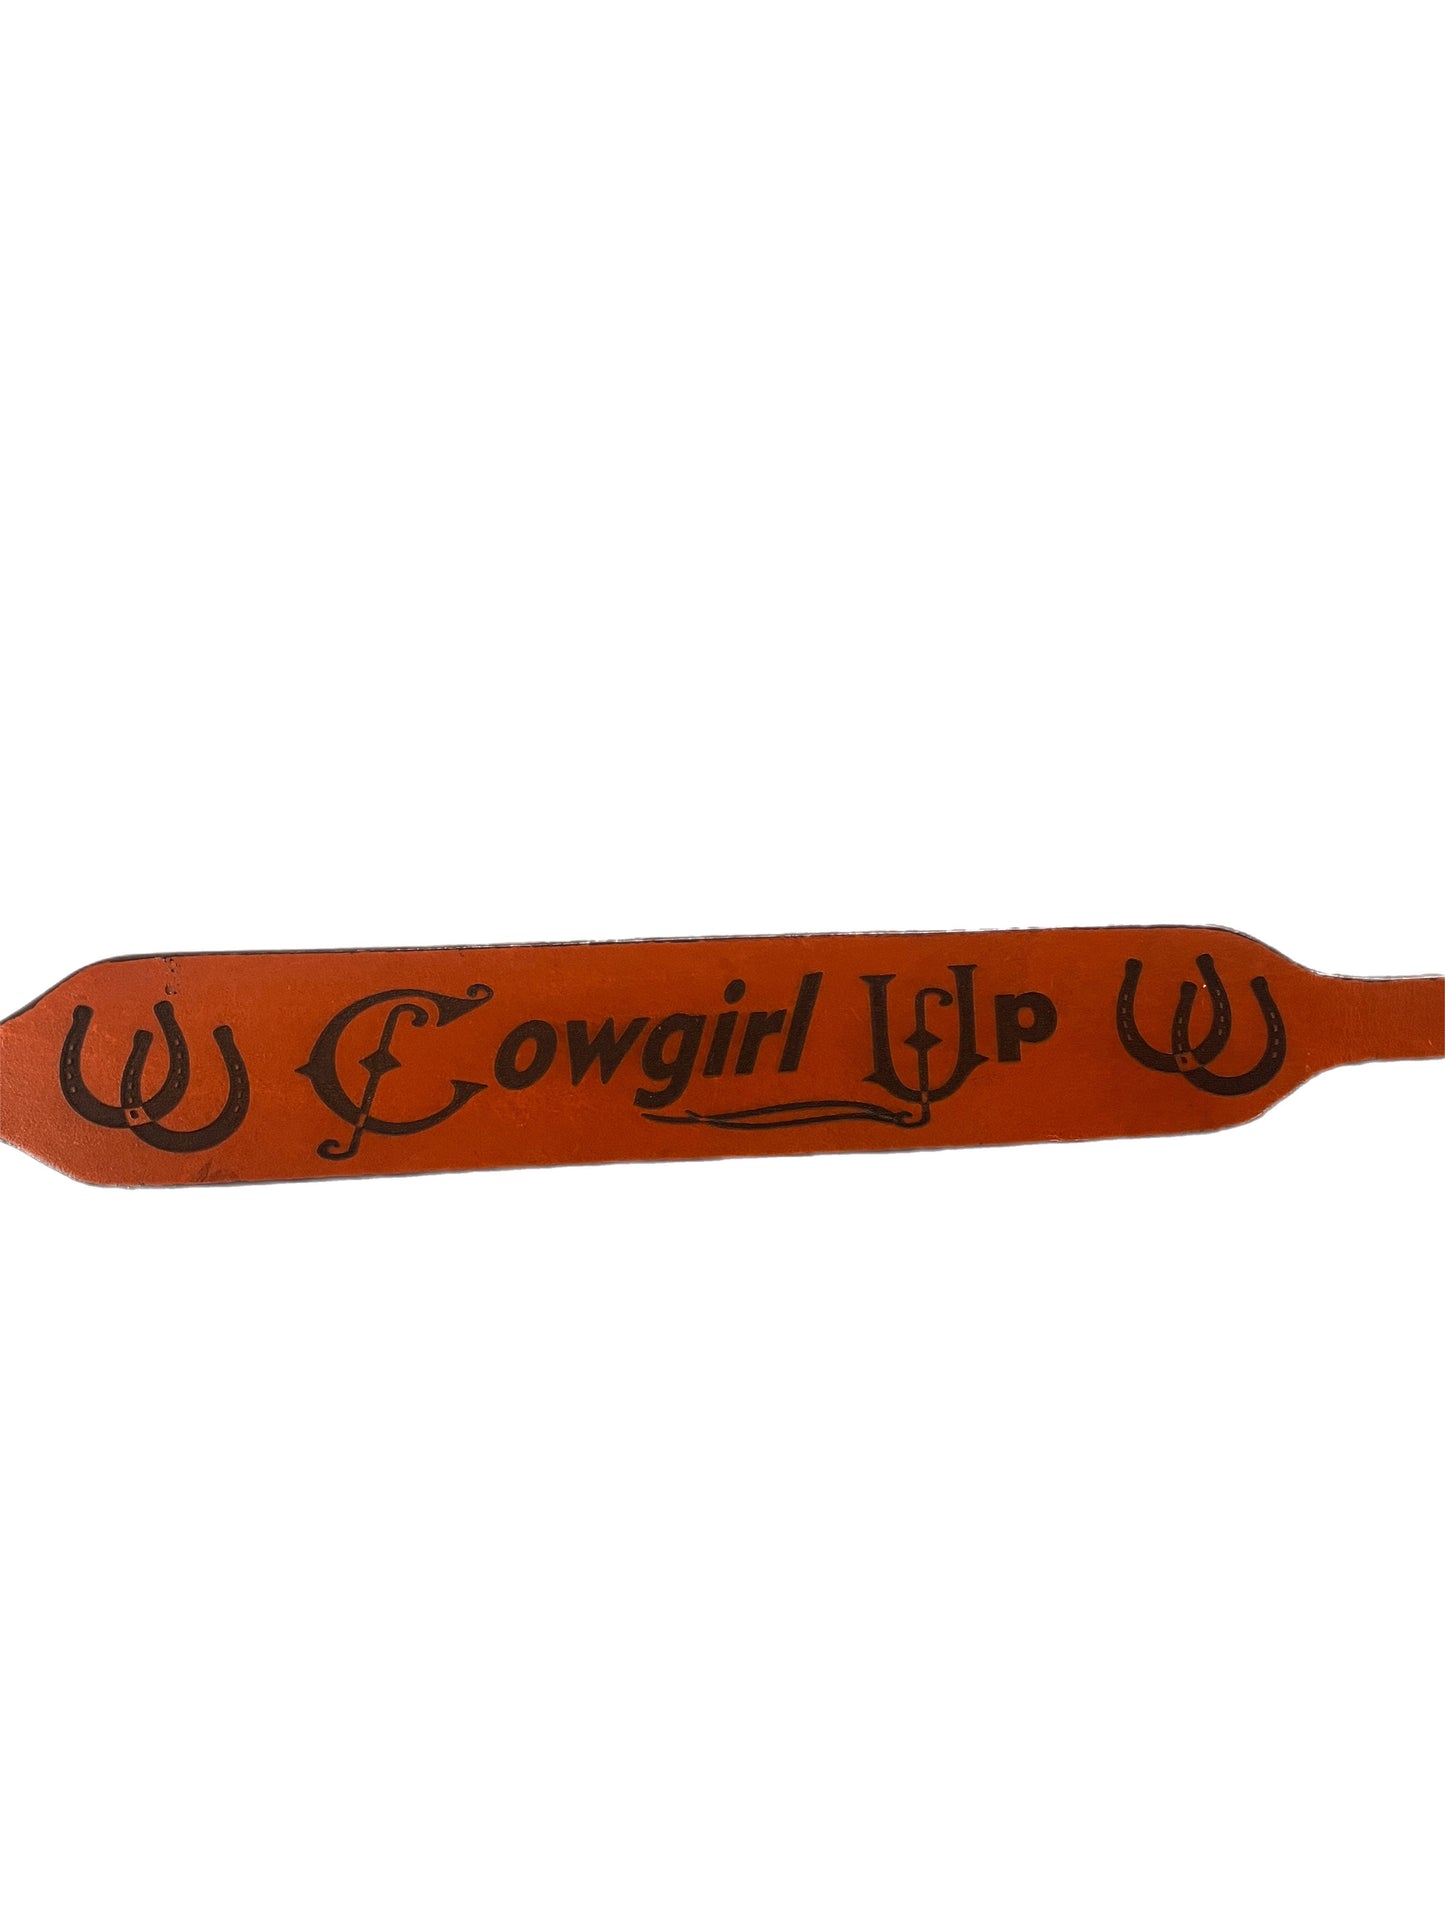 'Cowgirl Up' Leather Wither Strap